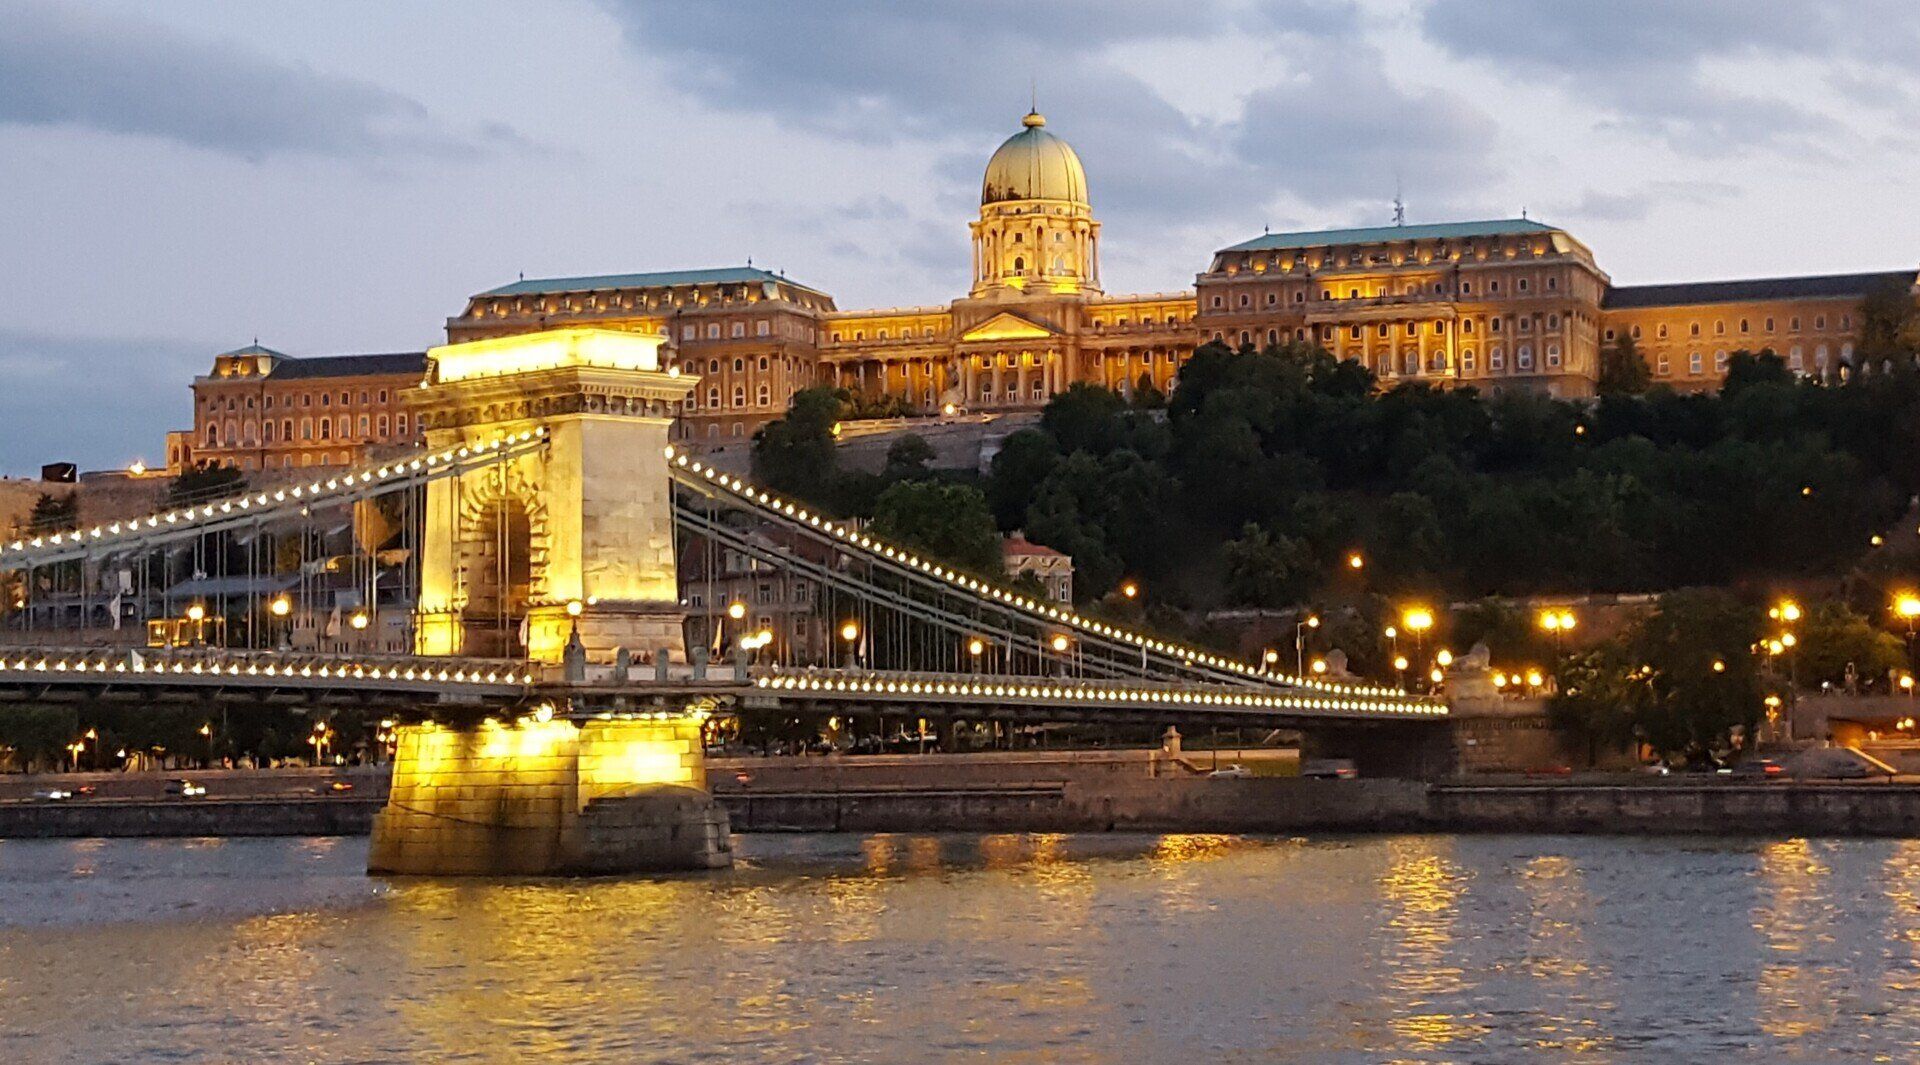 Danube River Cruise Budapest, Hungary set sail lights castle Parliament House churches